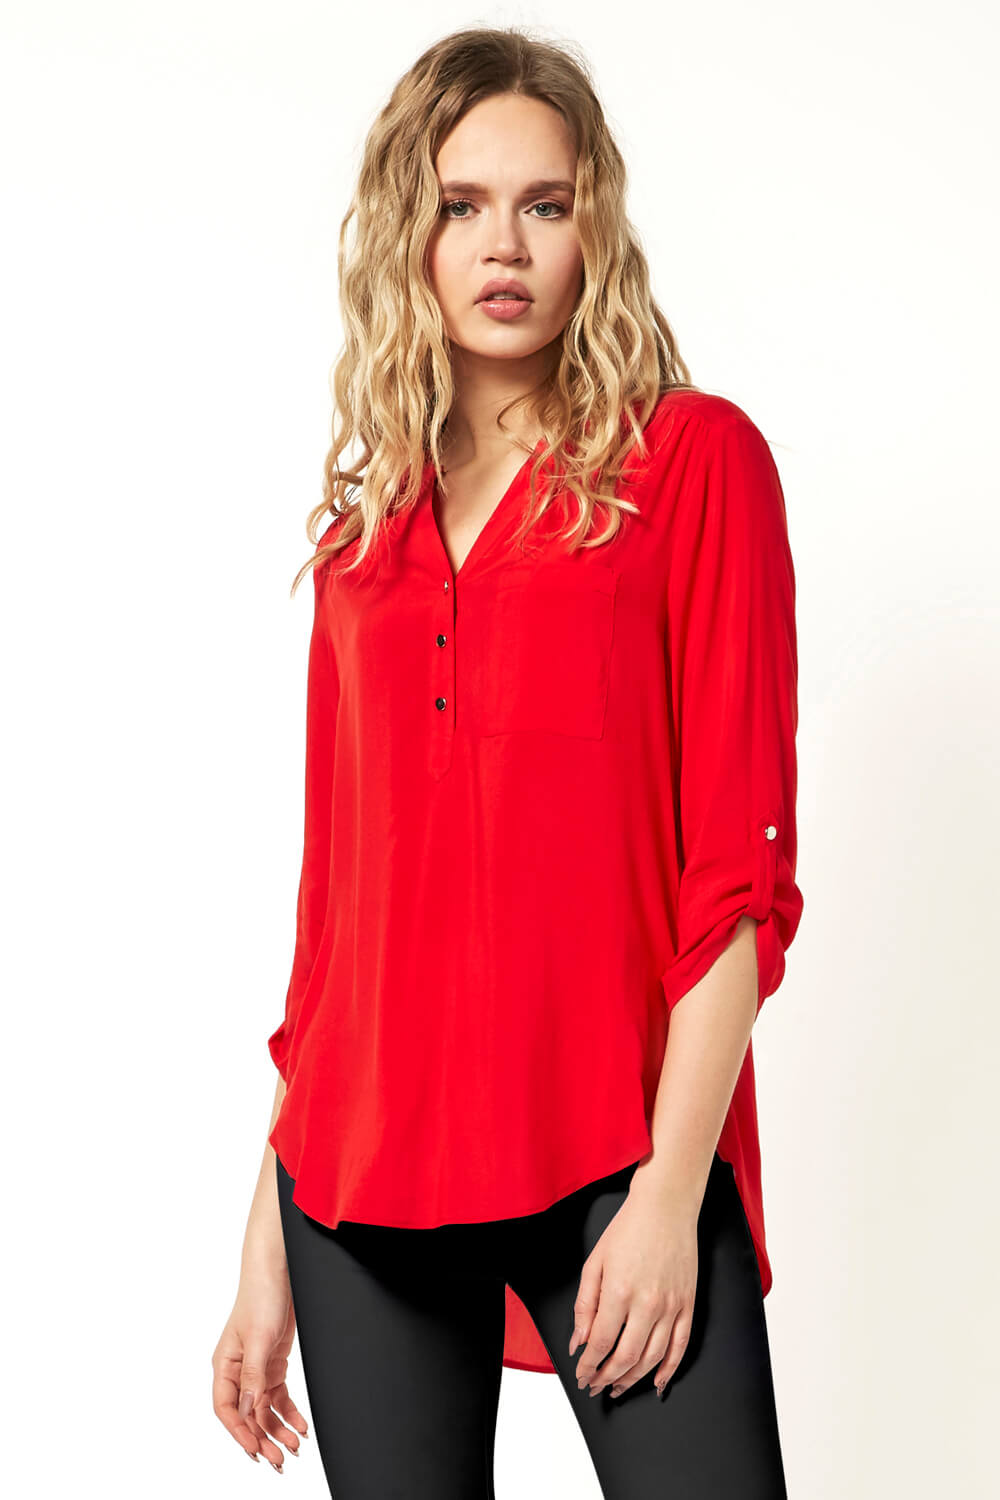 Notch Neck Button Front Top in Red - Roman Originals UK